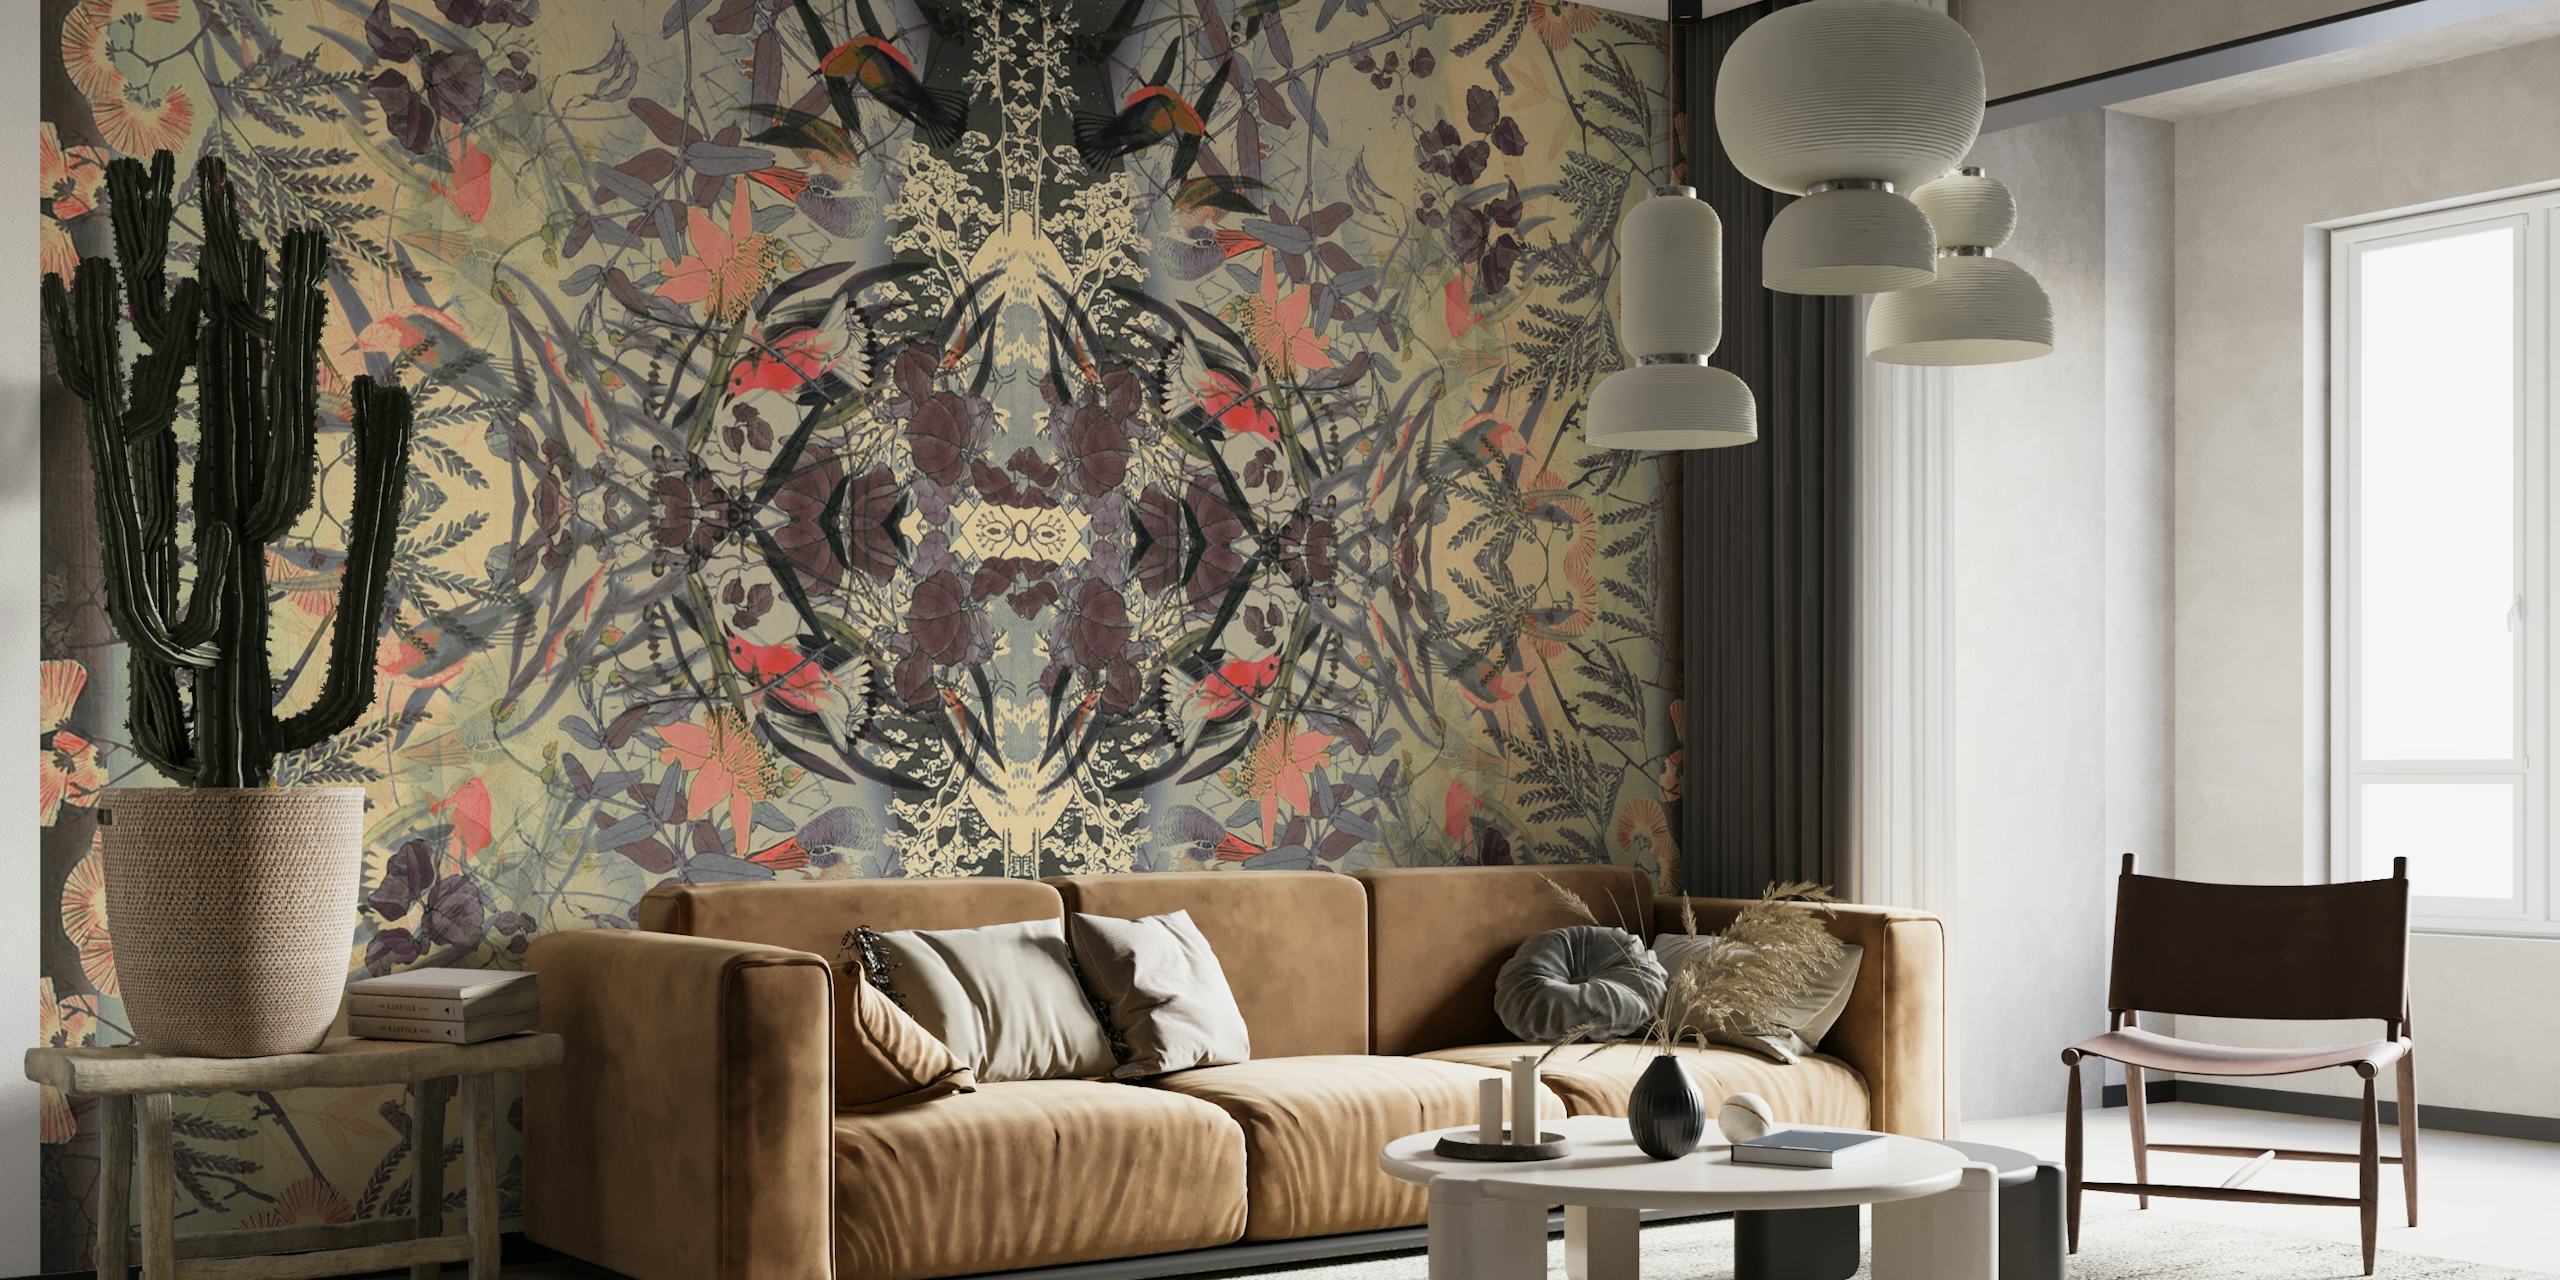 Harmonious 'Silence in Kyoto' wall mural with Japanese floral motifs